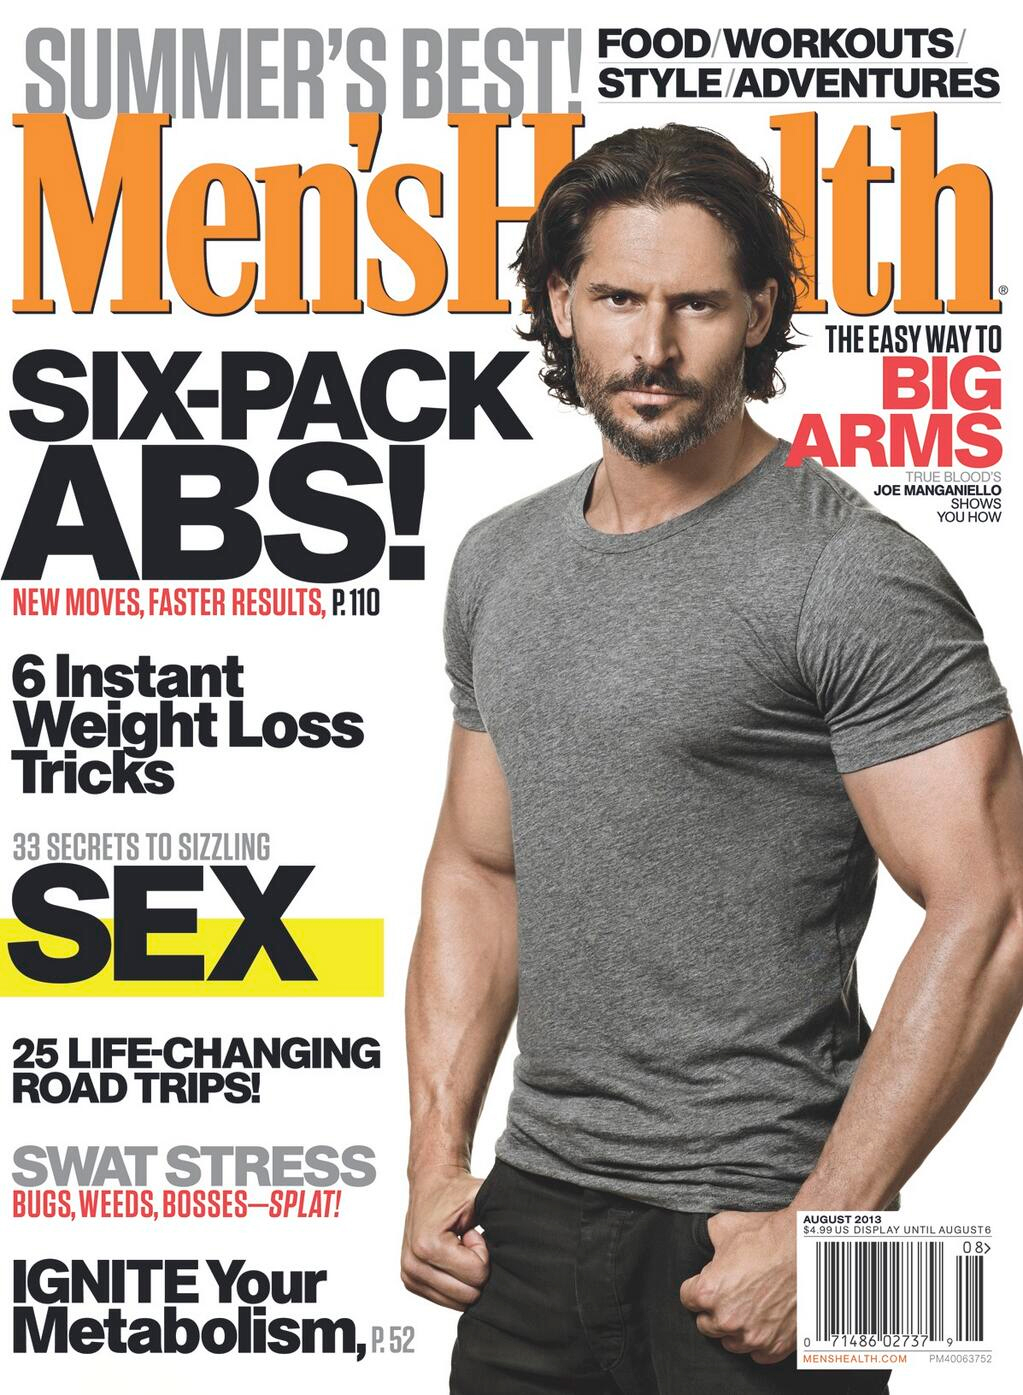 Joe Manganiello Stars In Shirtless Cover Shoot For Men S Health August 2013 Issue The Fashionisto